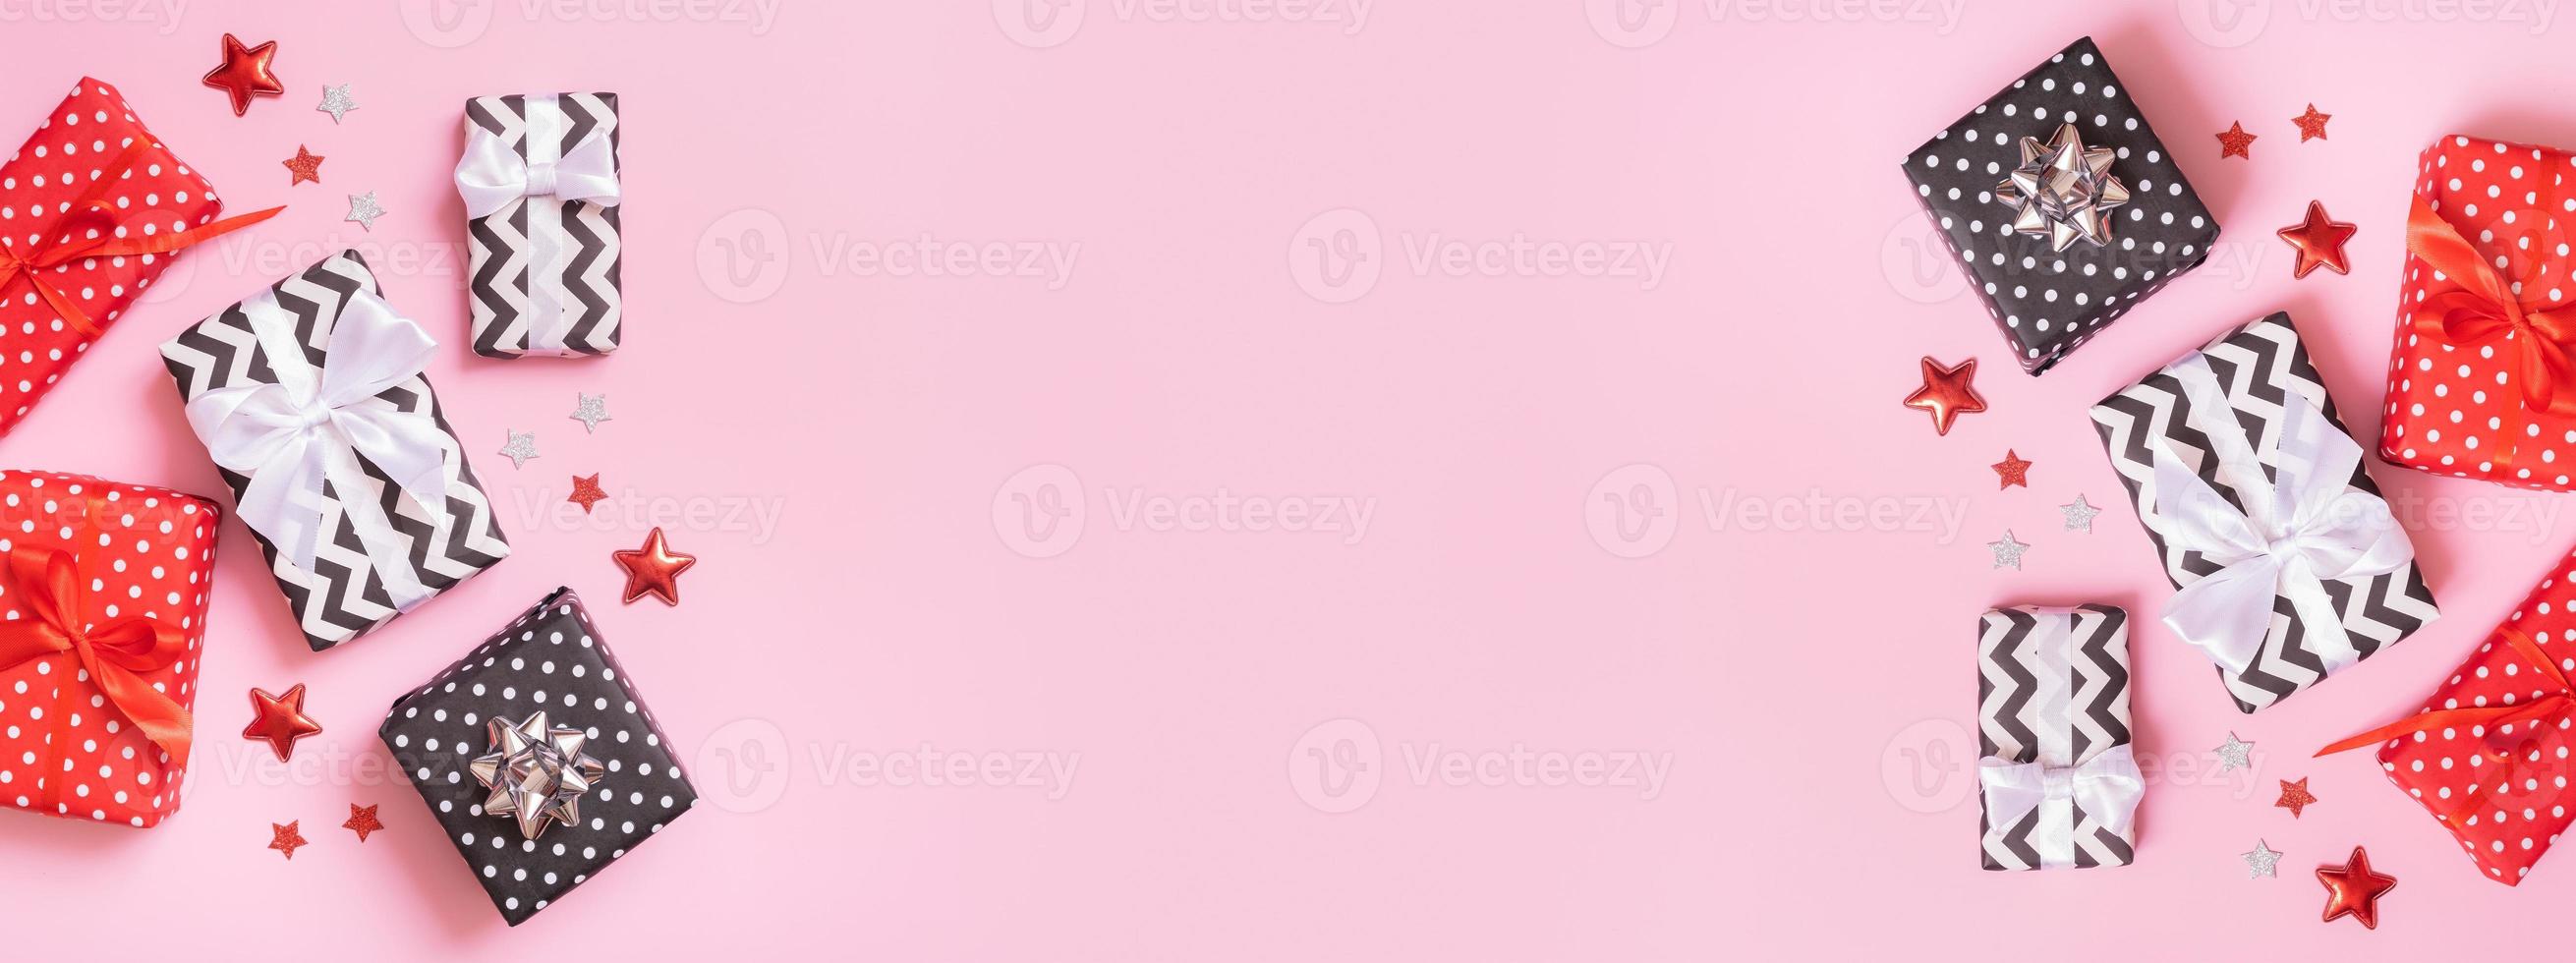 Banner with Christmas presents flat lay on a pink background. Top view xmas gifts with decorations photo